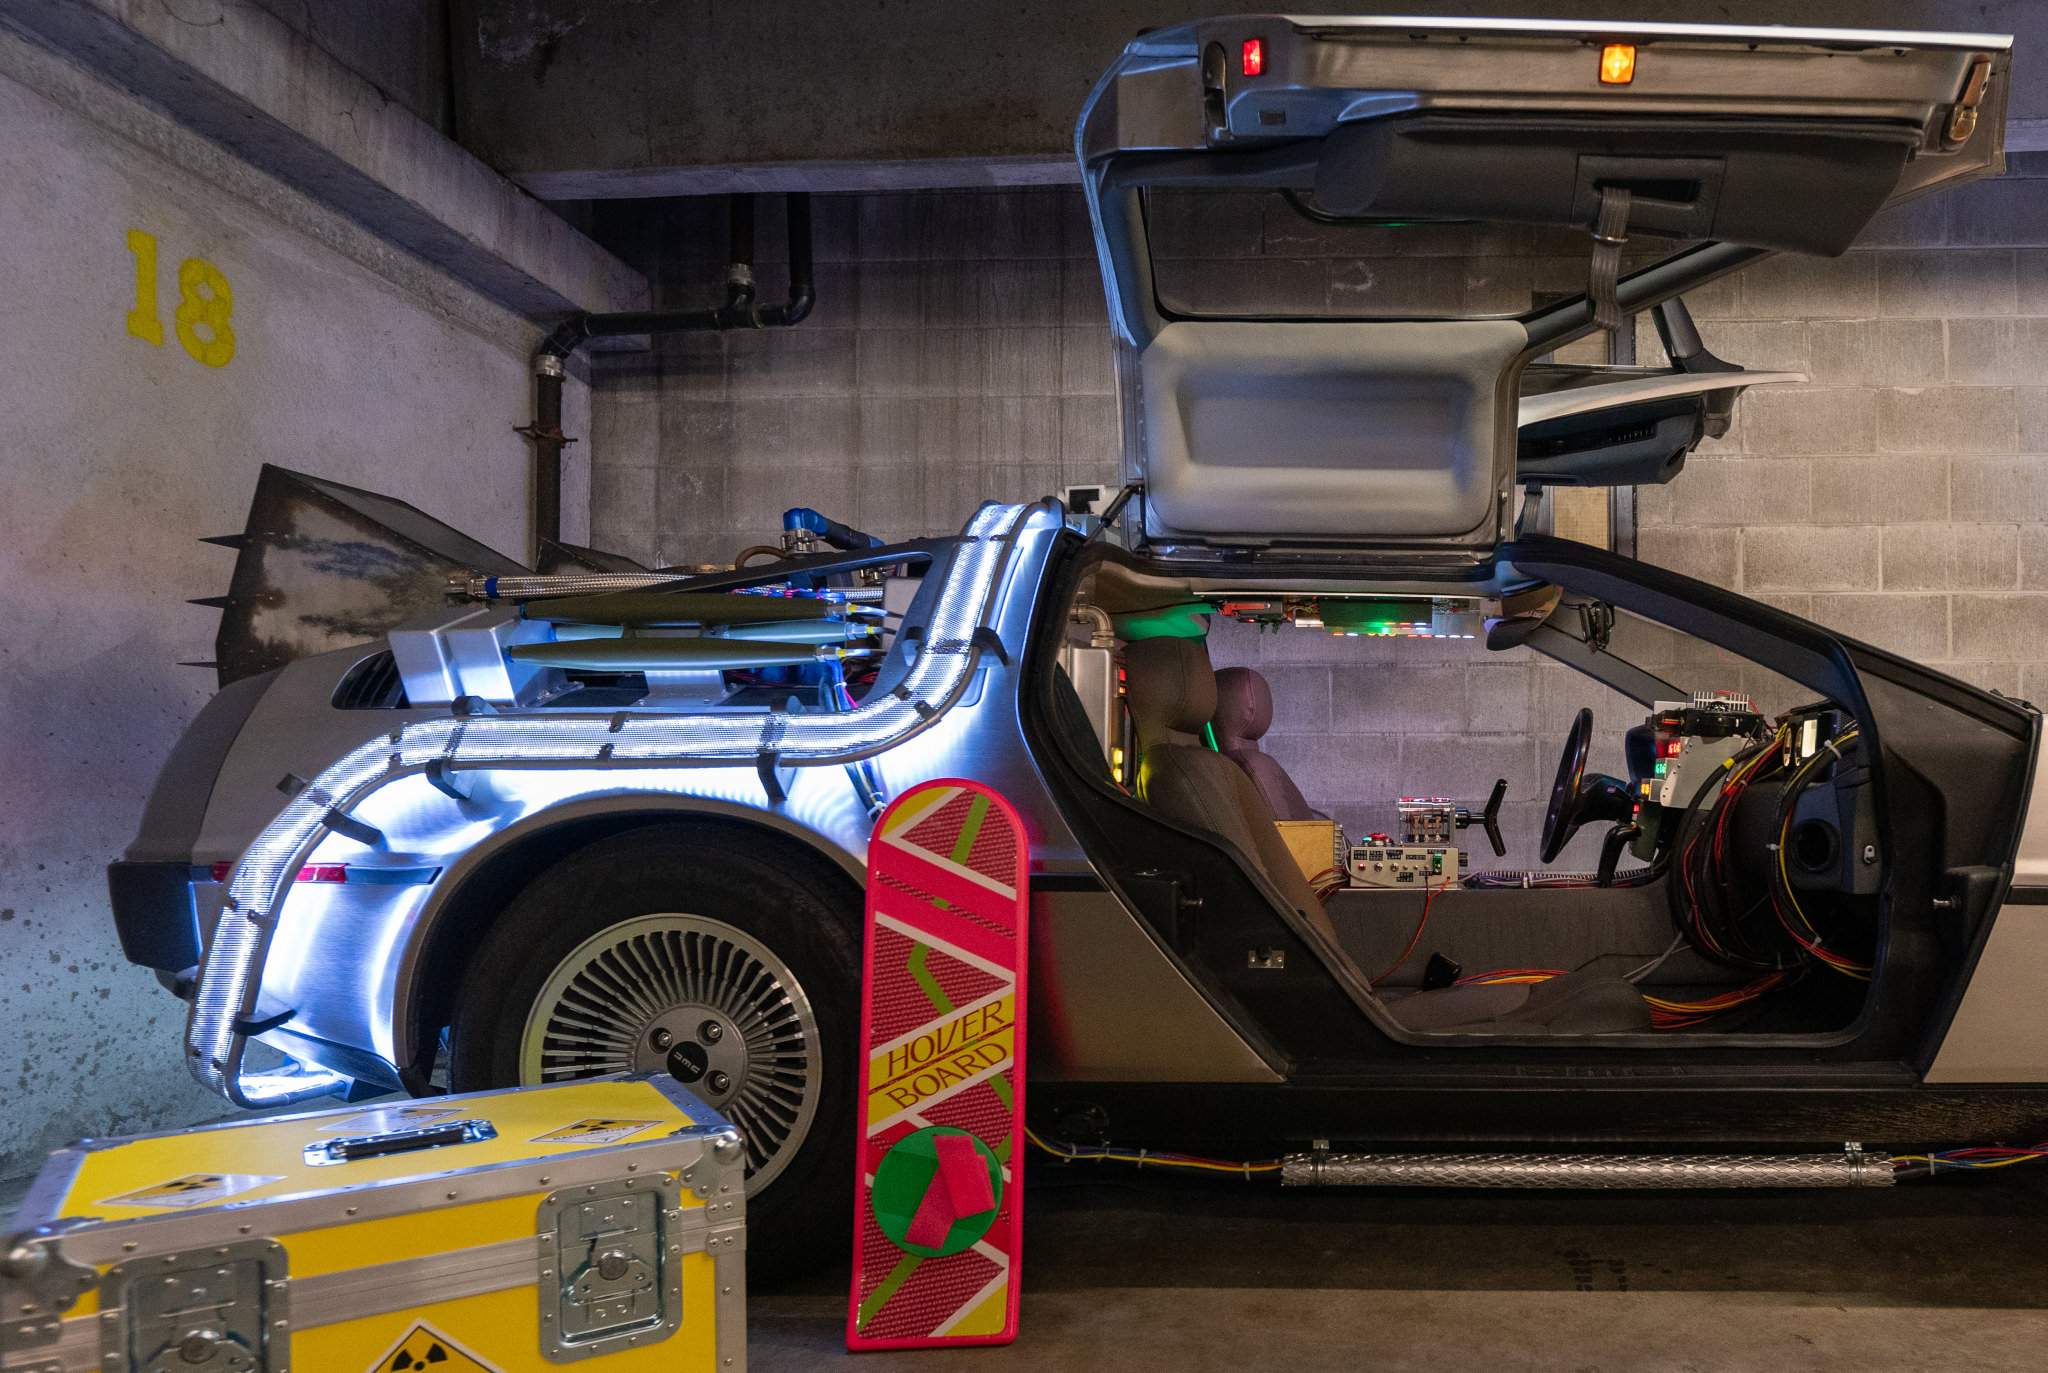 DeLorean 'Time Machine' replica exterior: Time circuit switch, gull-wing doors, time bands, a hoverboard, and a case of plutonium.